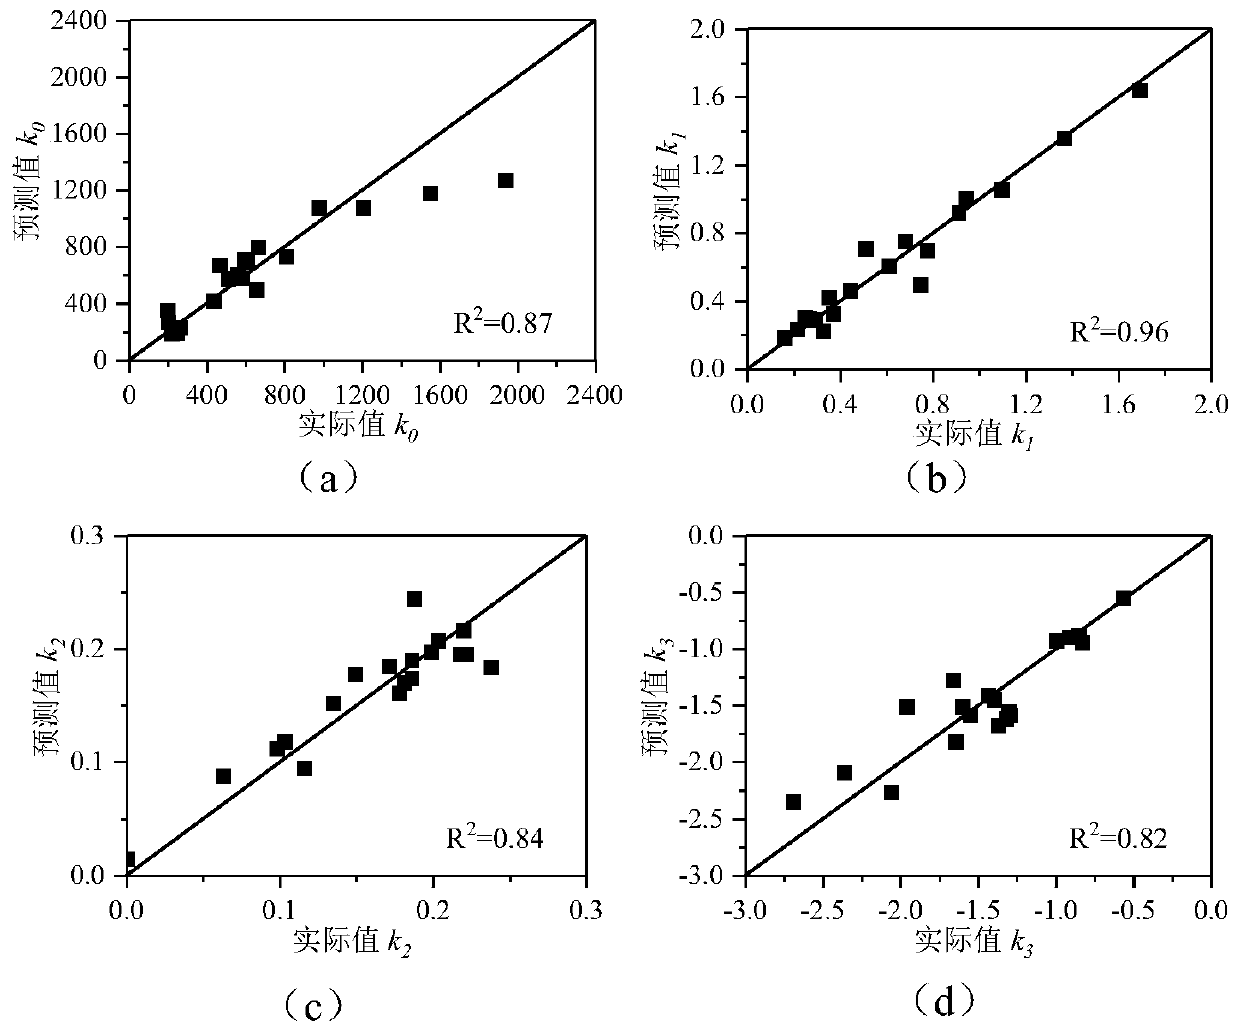 A method for rapidly determining a soil-water characteristic curve and dynamic rebound modulus model parameters